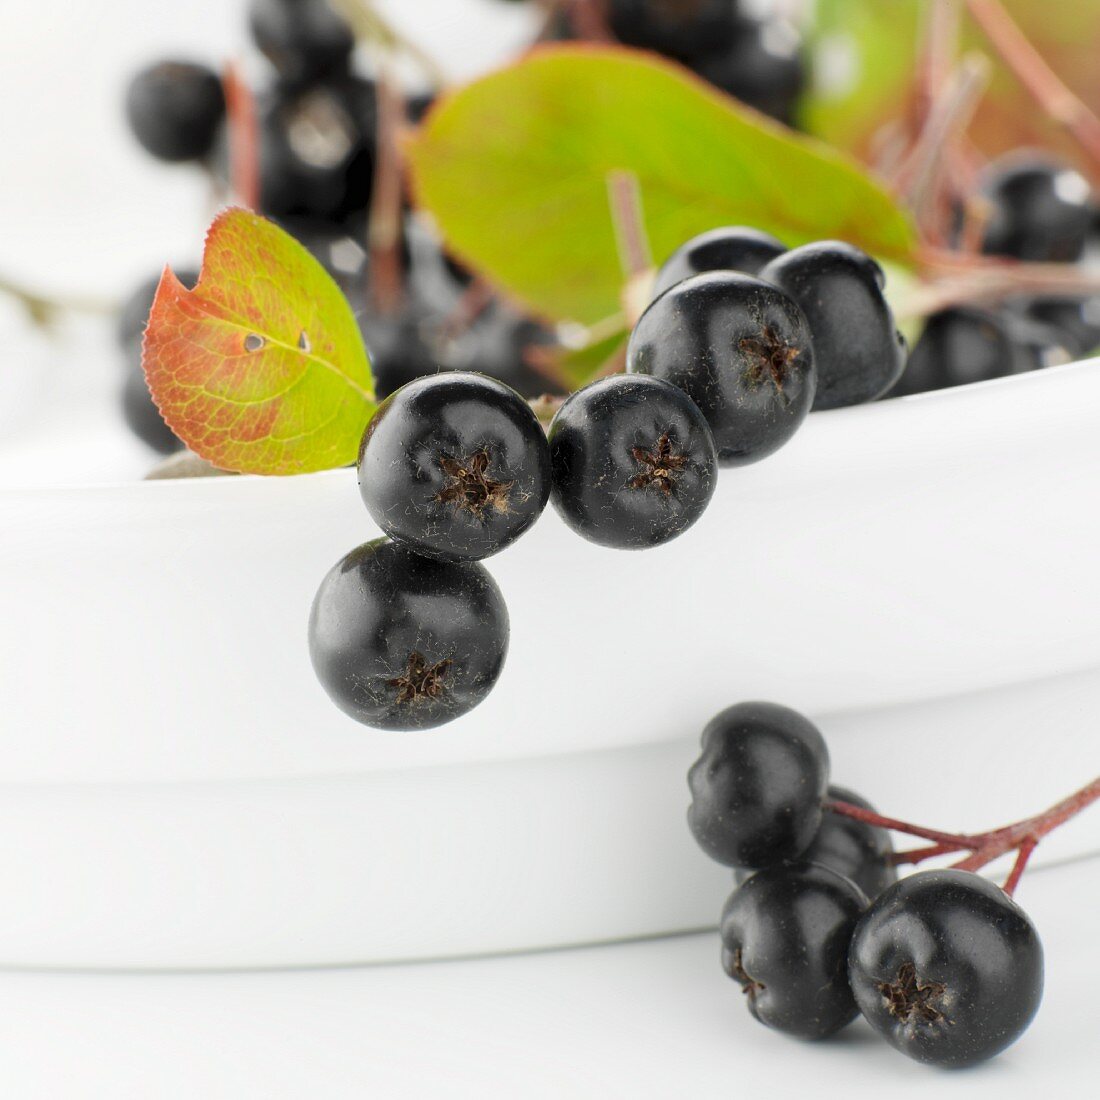 Aronia berries with leaves in a bowl